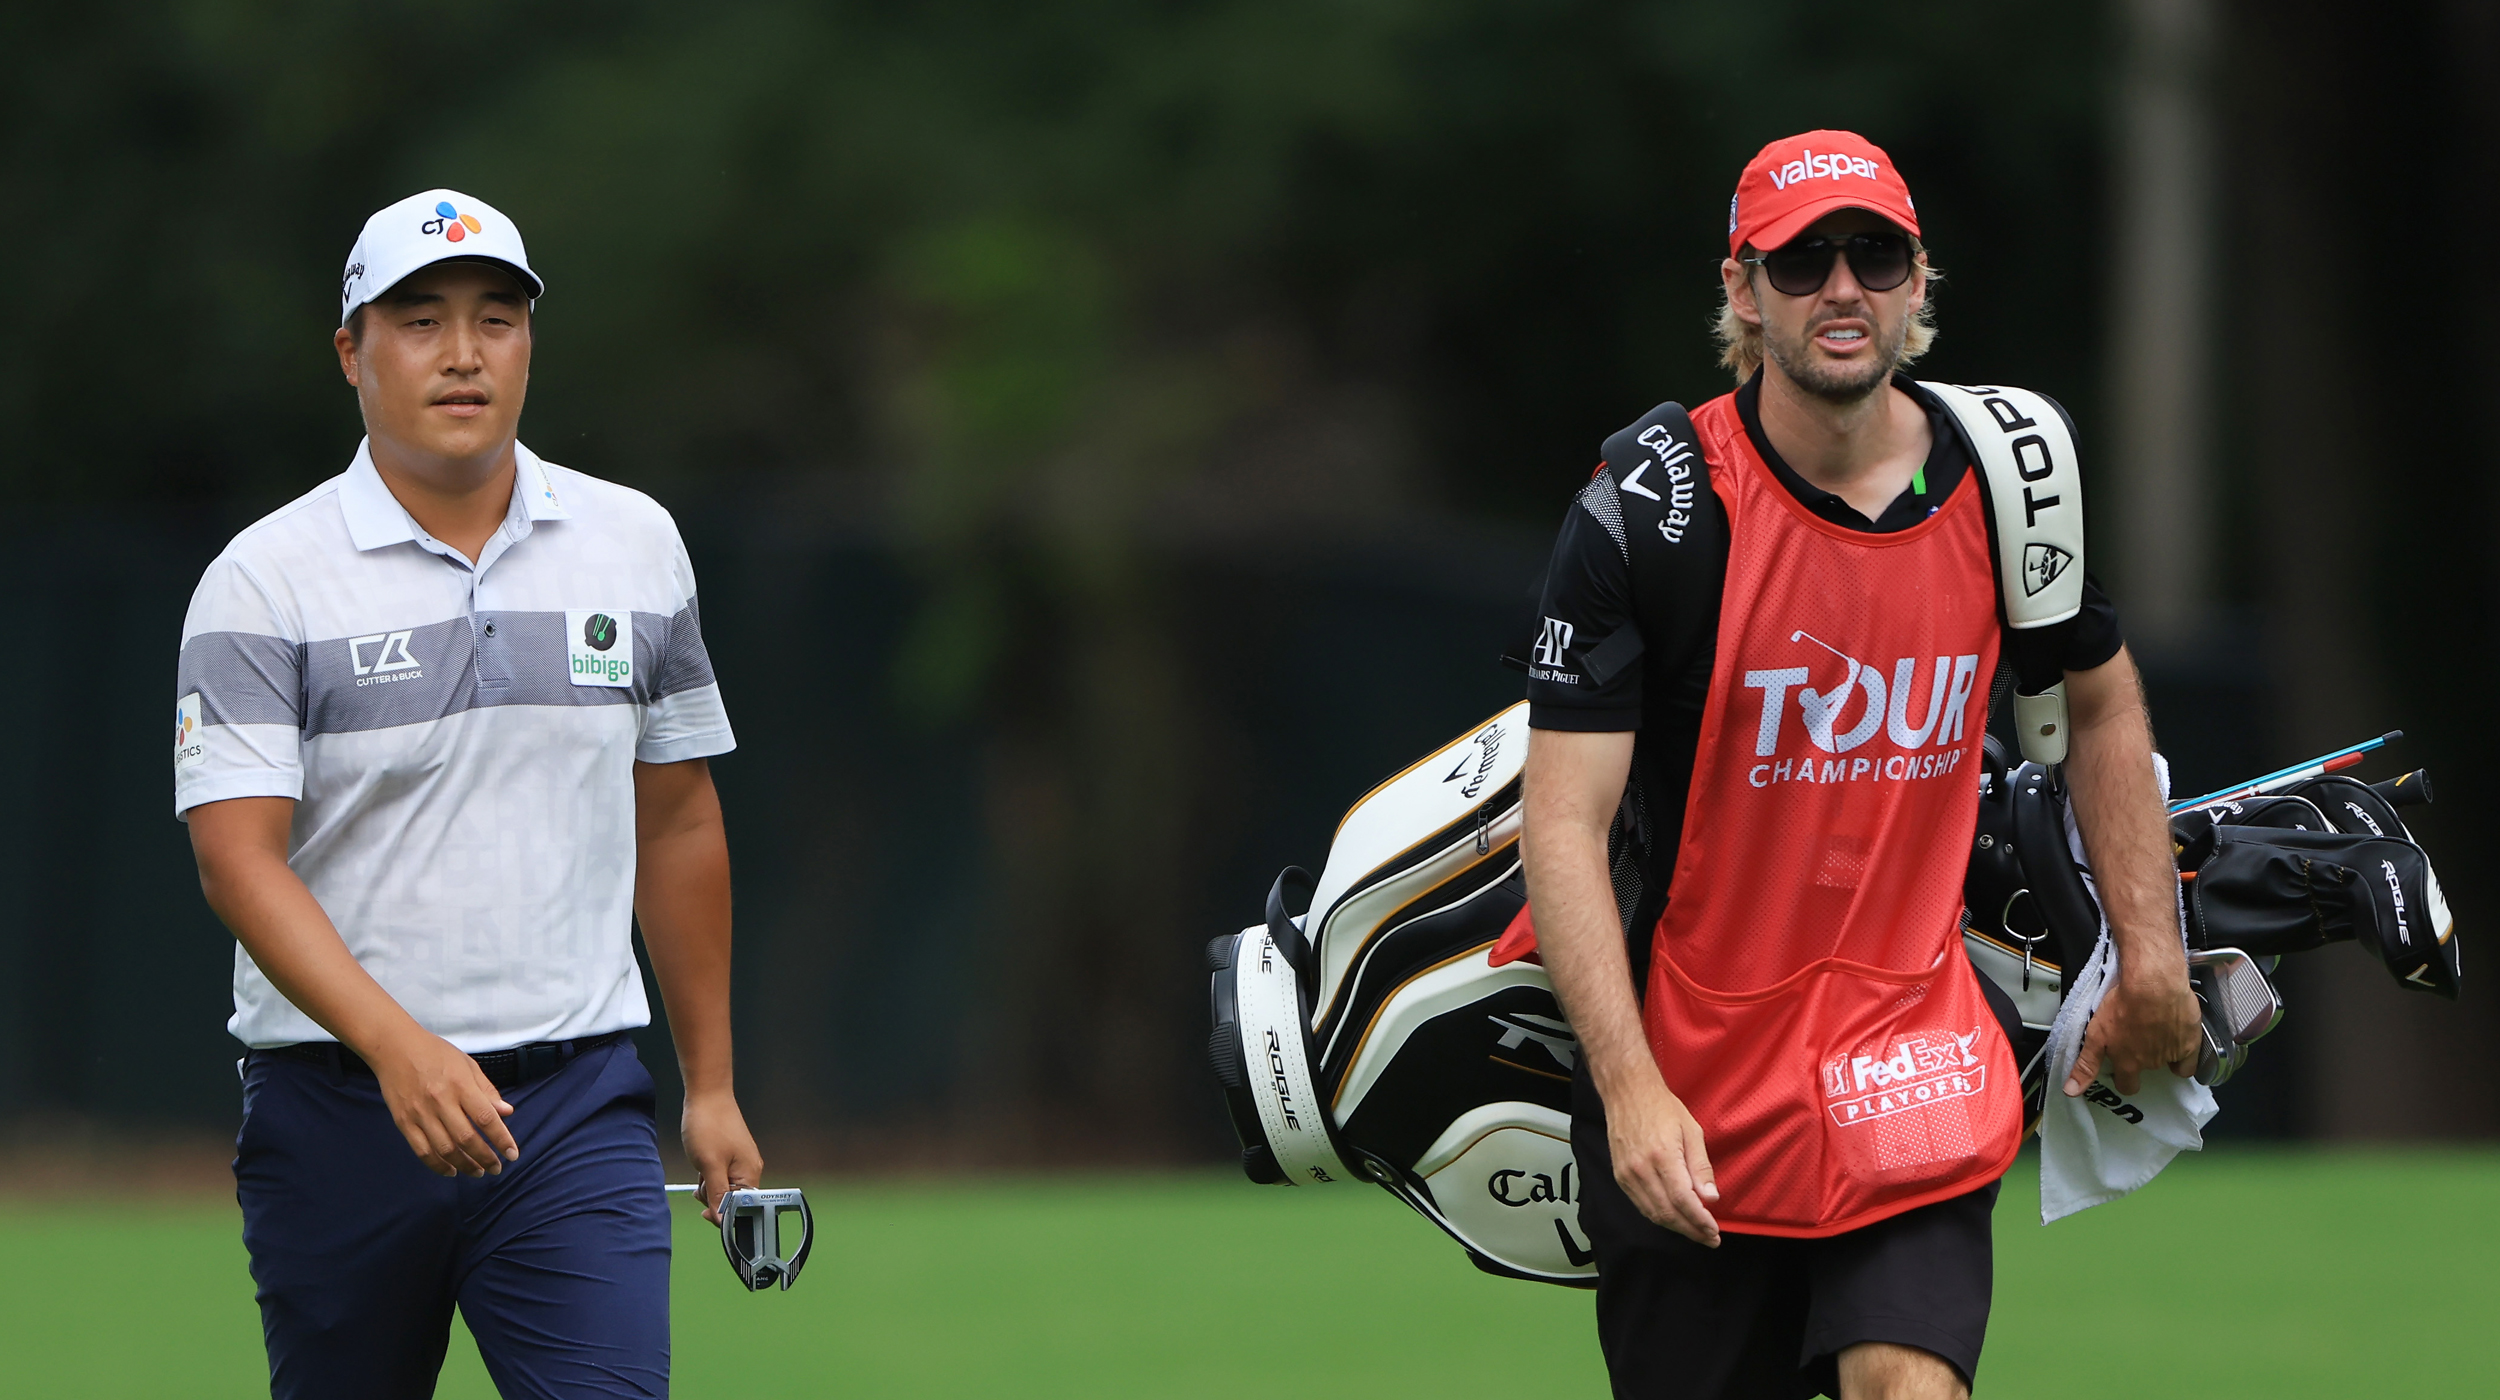 Who Is . Lee's Caddie? | Golf Monthly